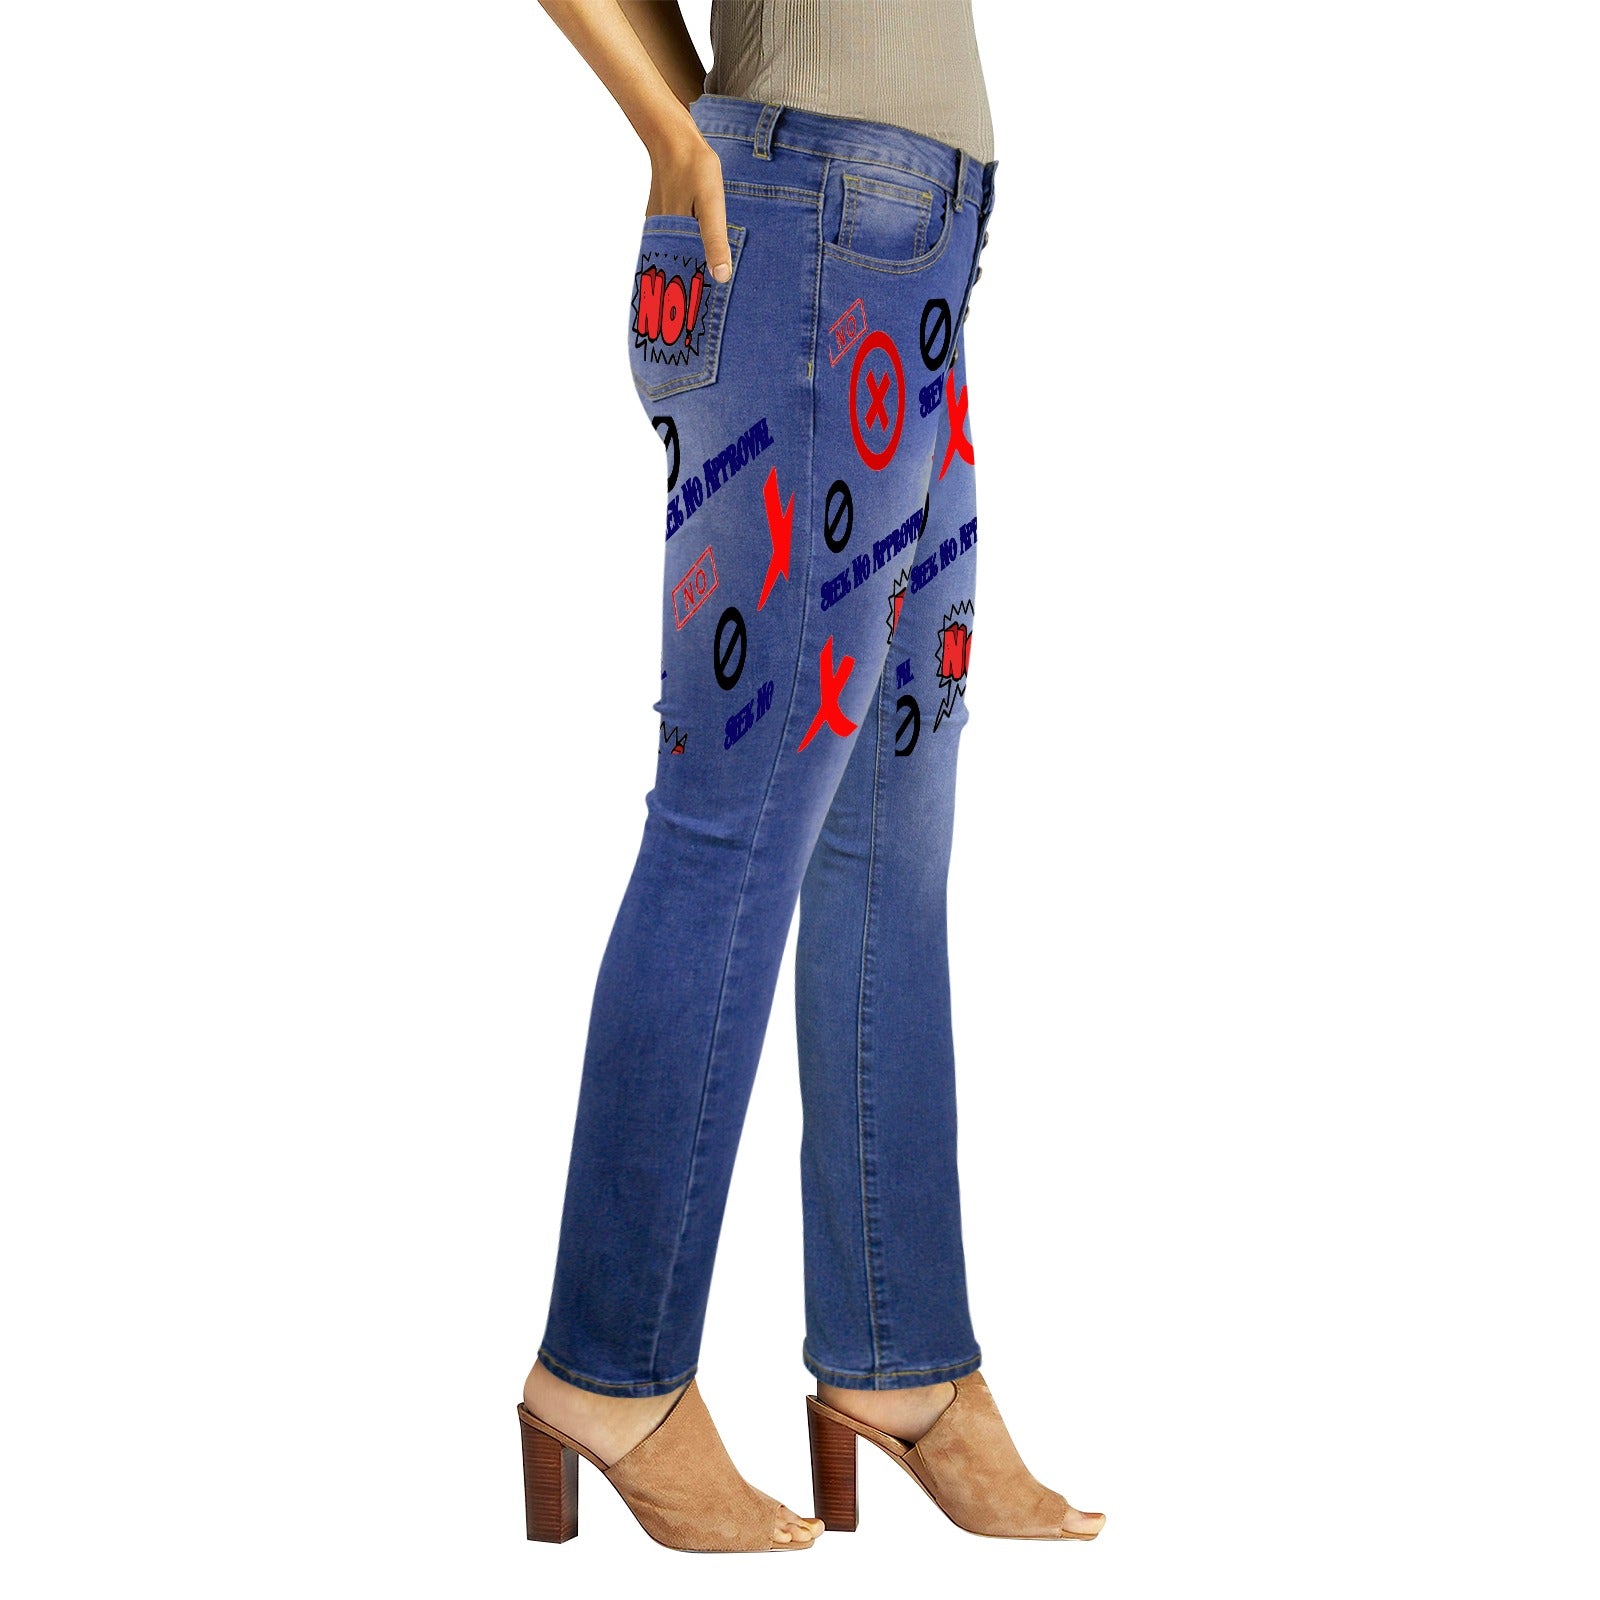 - Seek No Approval Women's Jeans - womens jeans at TFC&H Co.